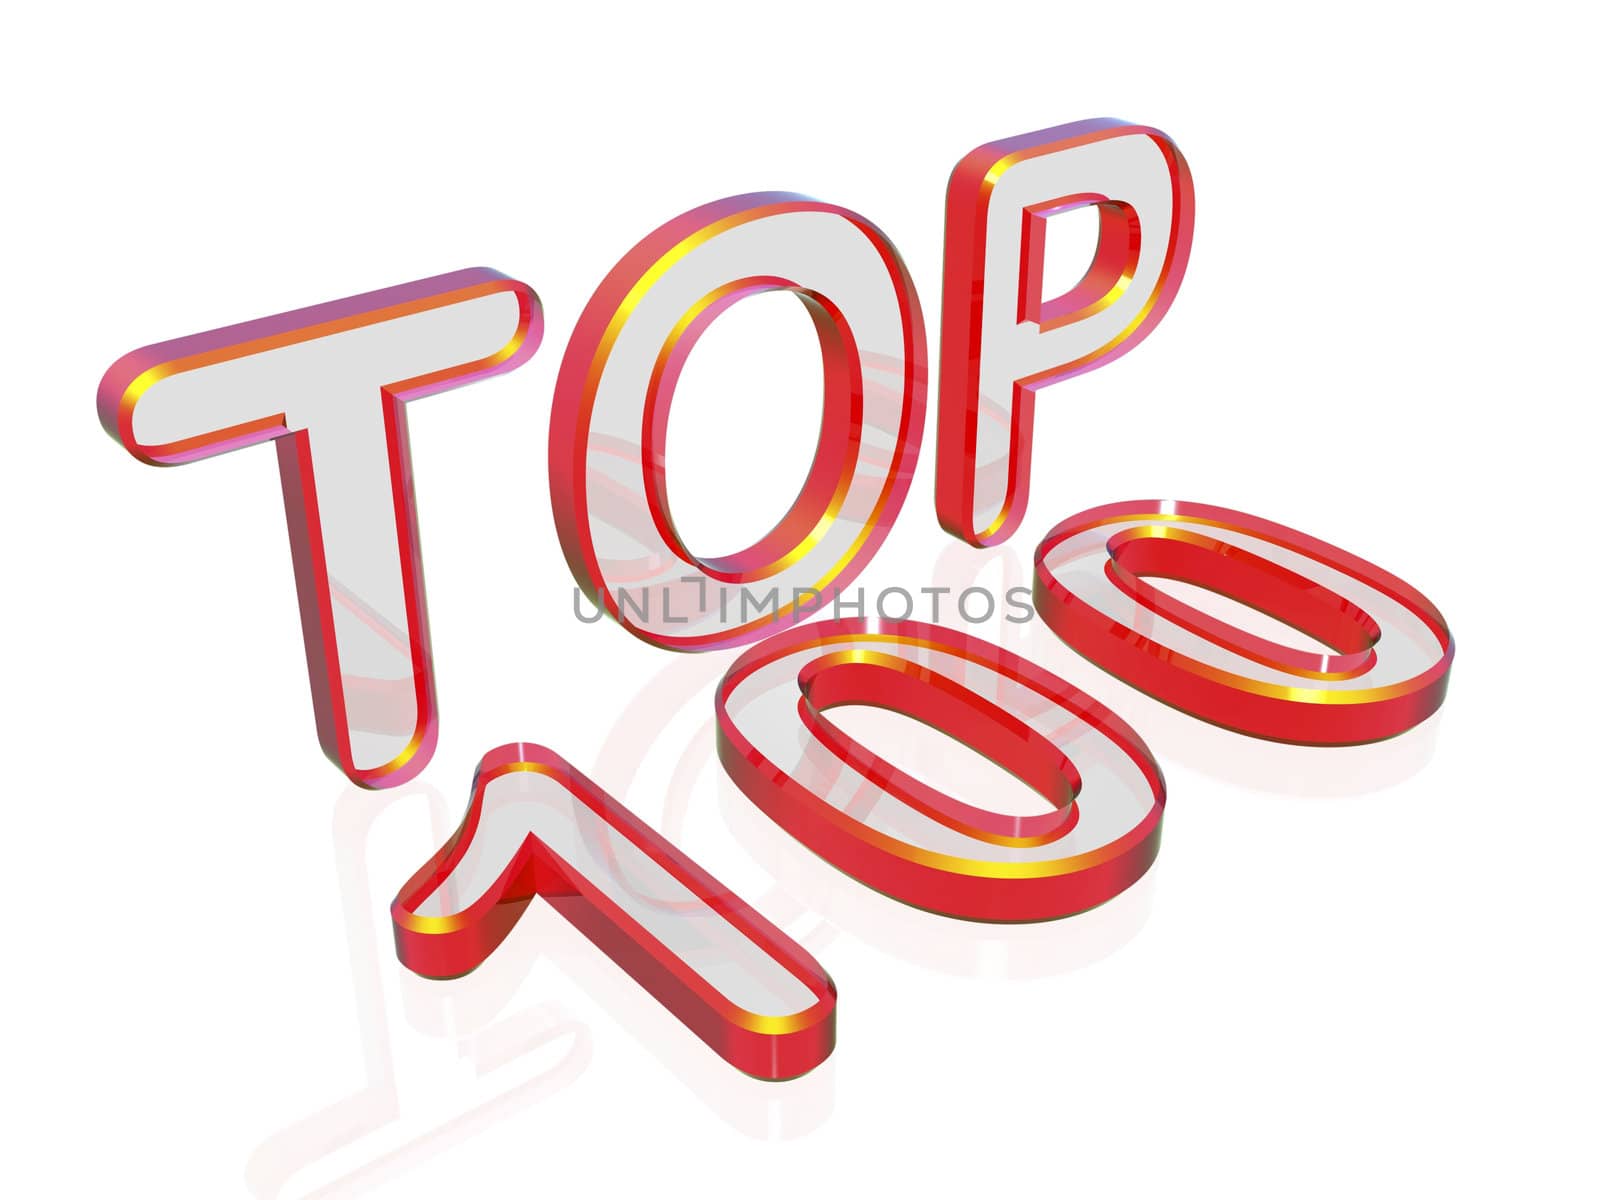 Top 100 by magraphics